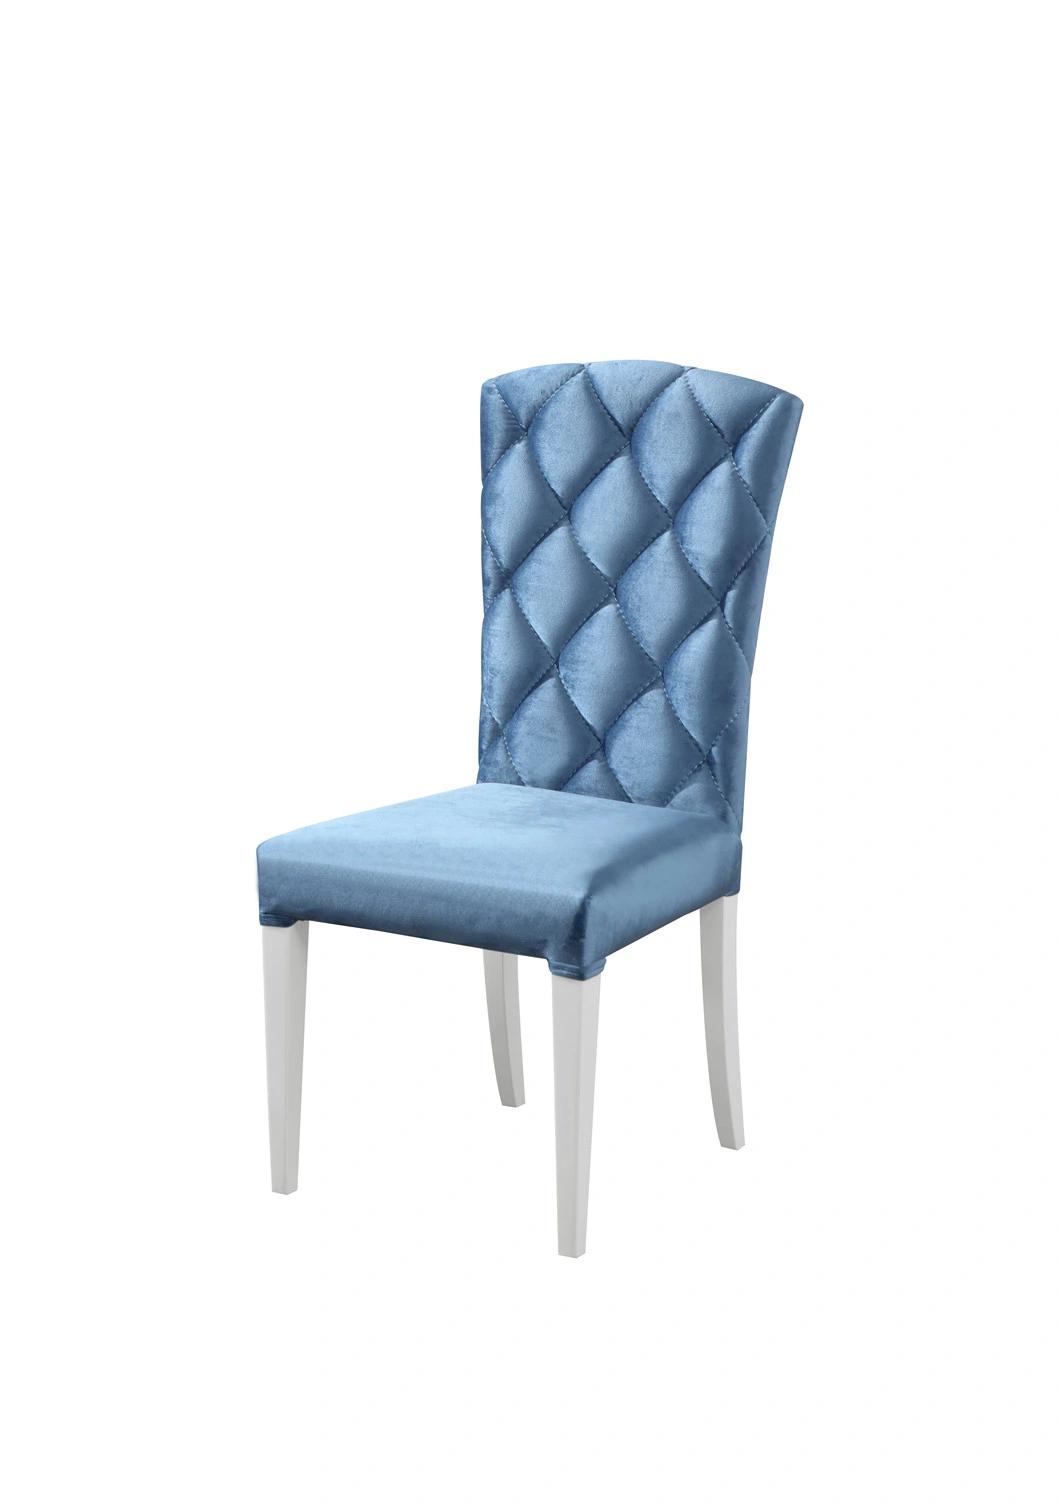 Modern Home Furniture Promotional Wooden Dining Room Chair with Fabric